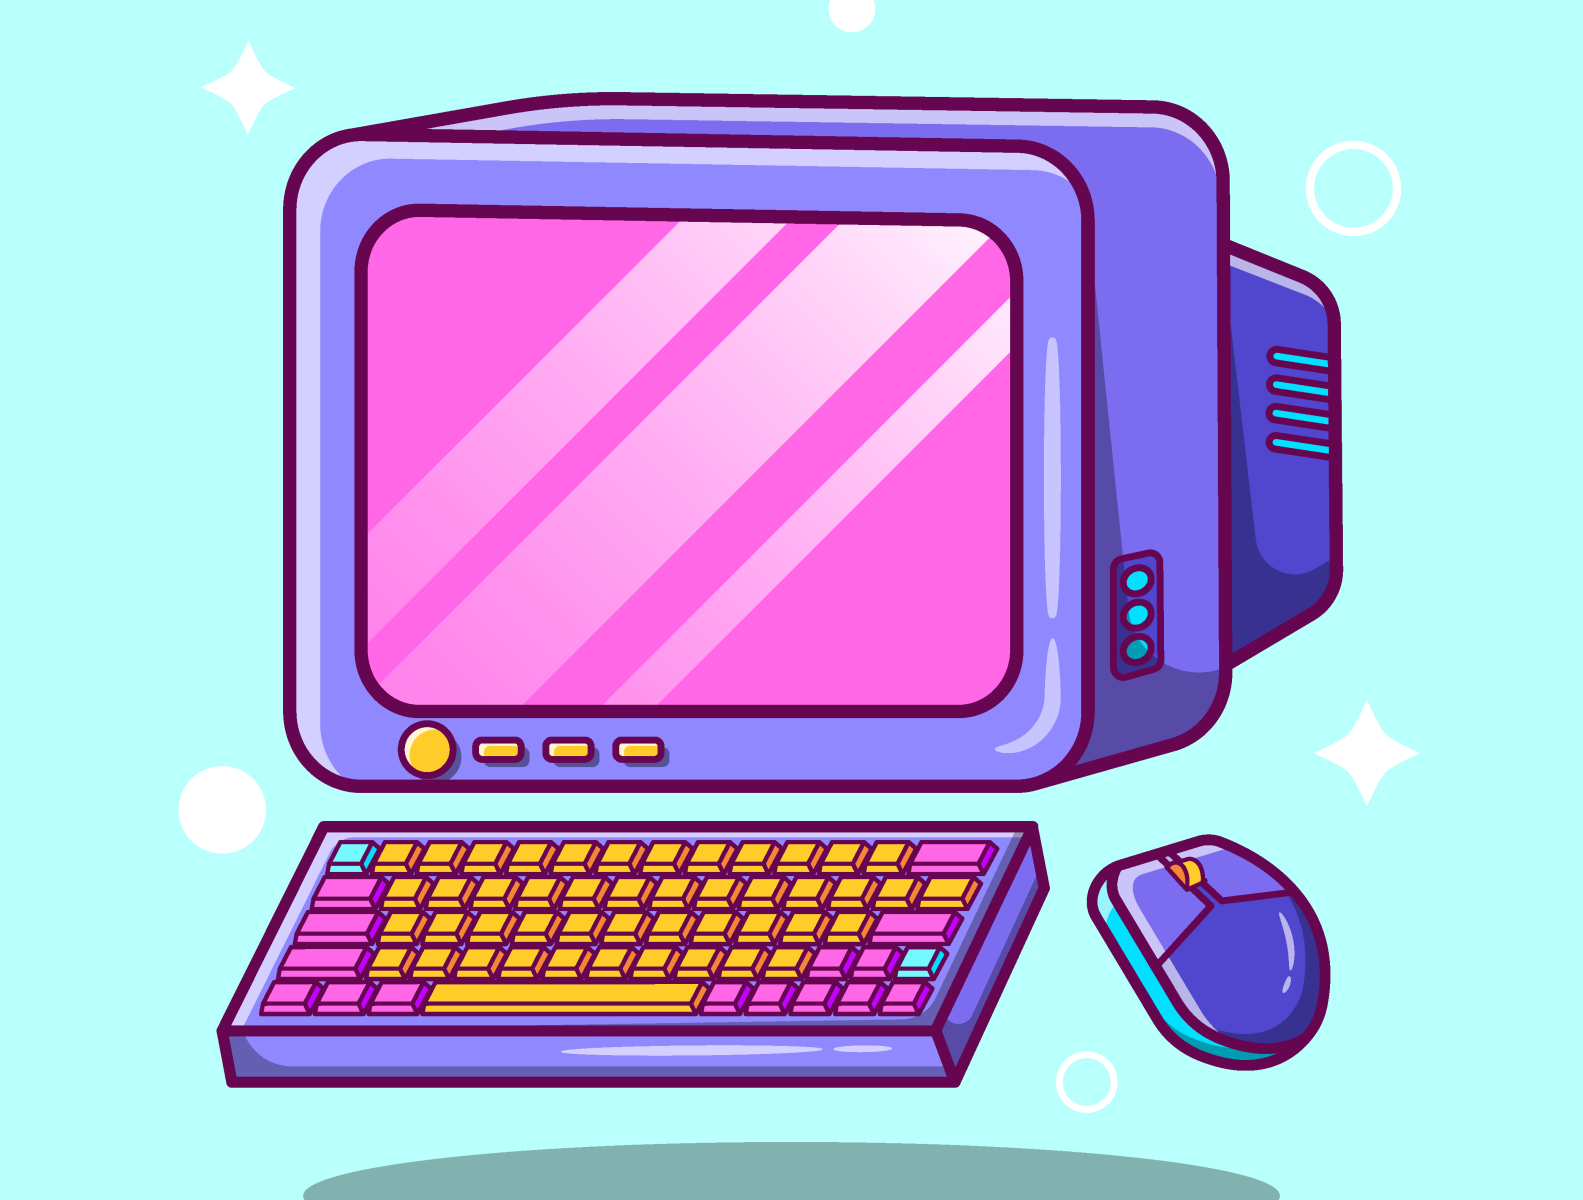 Cute Computer Cartoon by Idesign88 on Dribbble